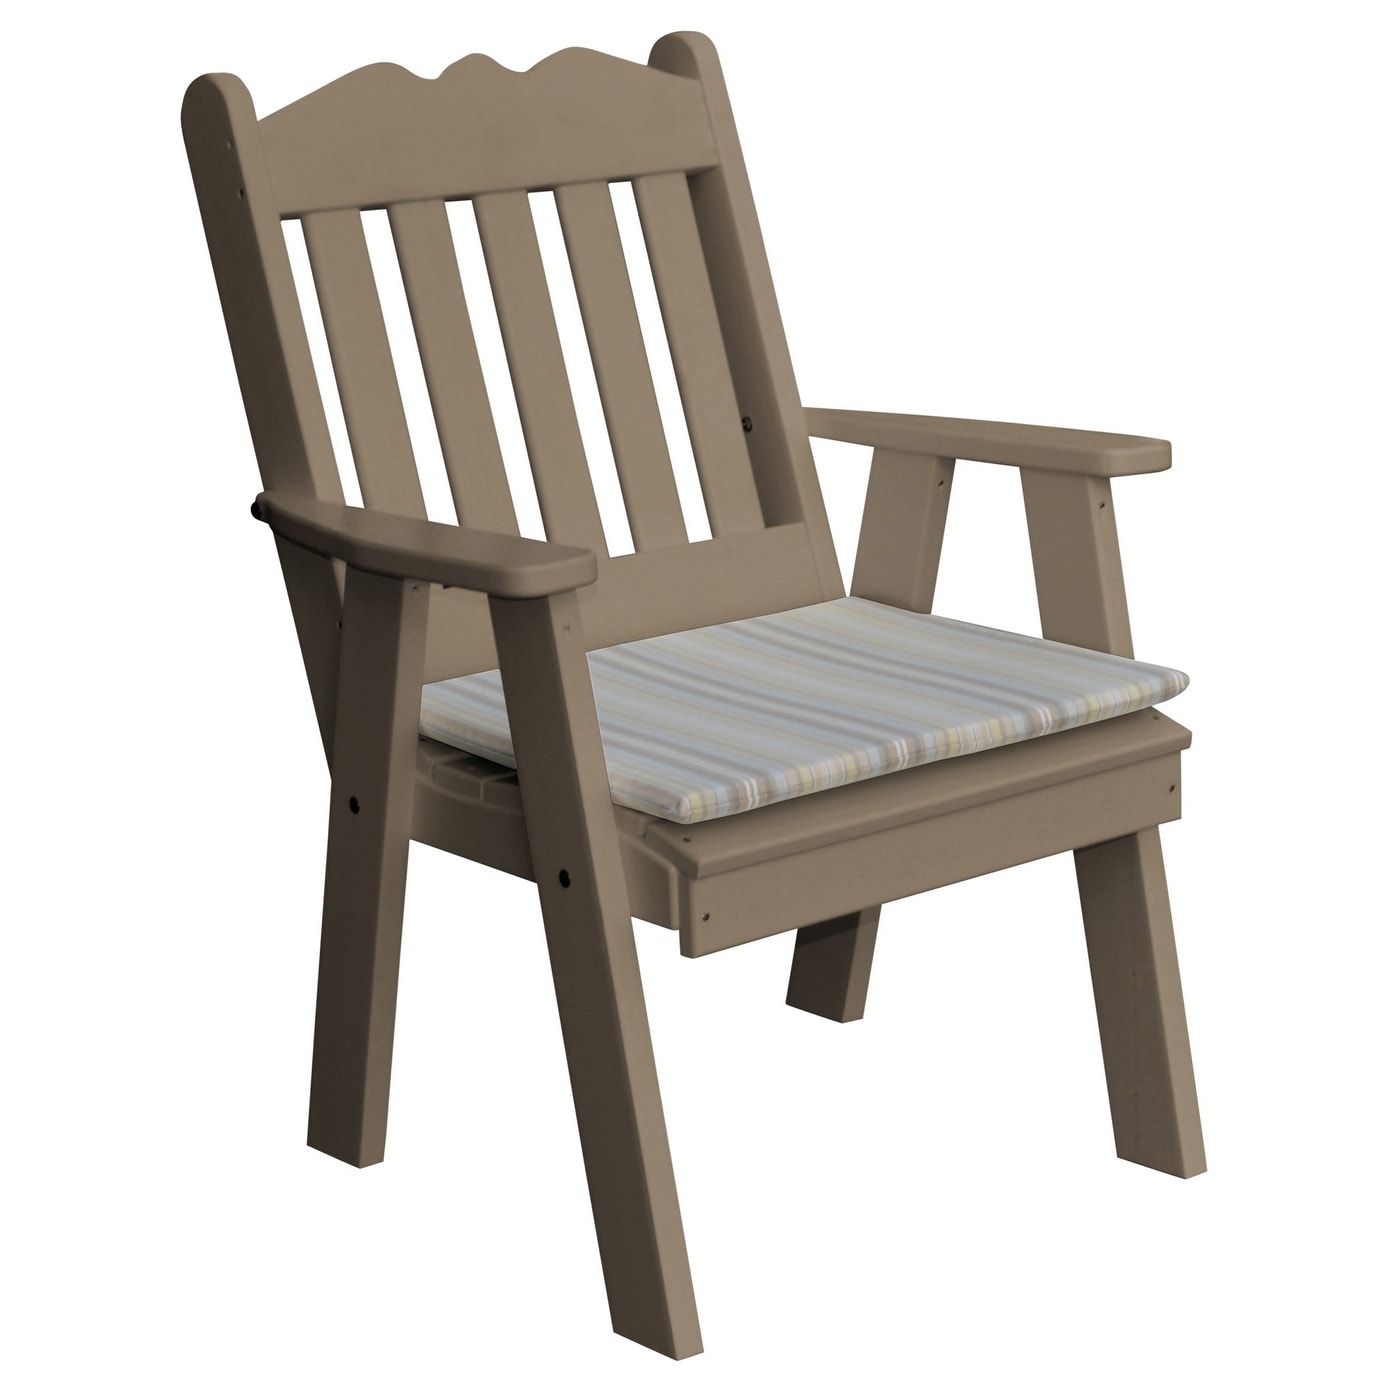 Royal English Chair In Poly Lumber